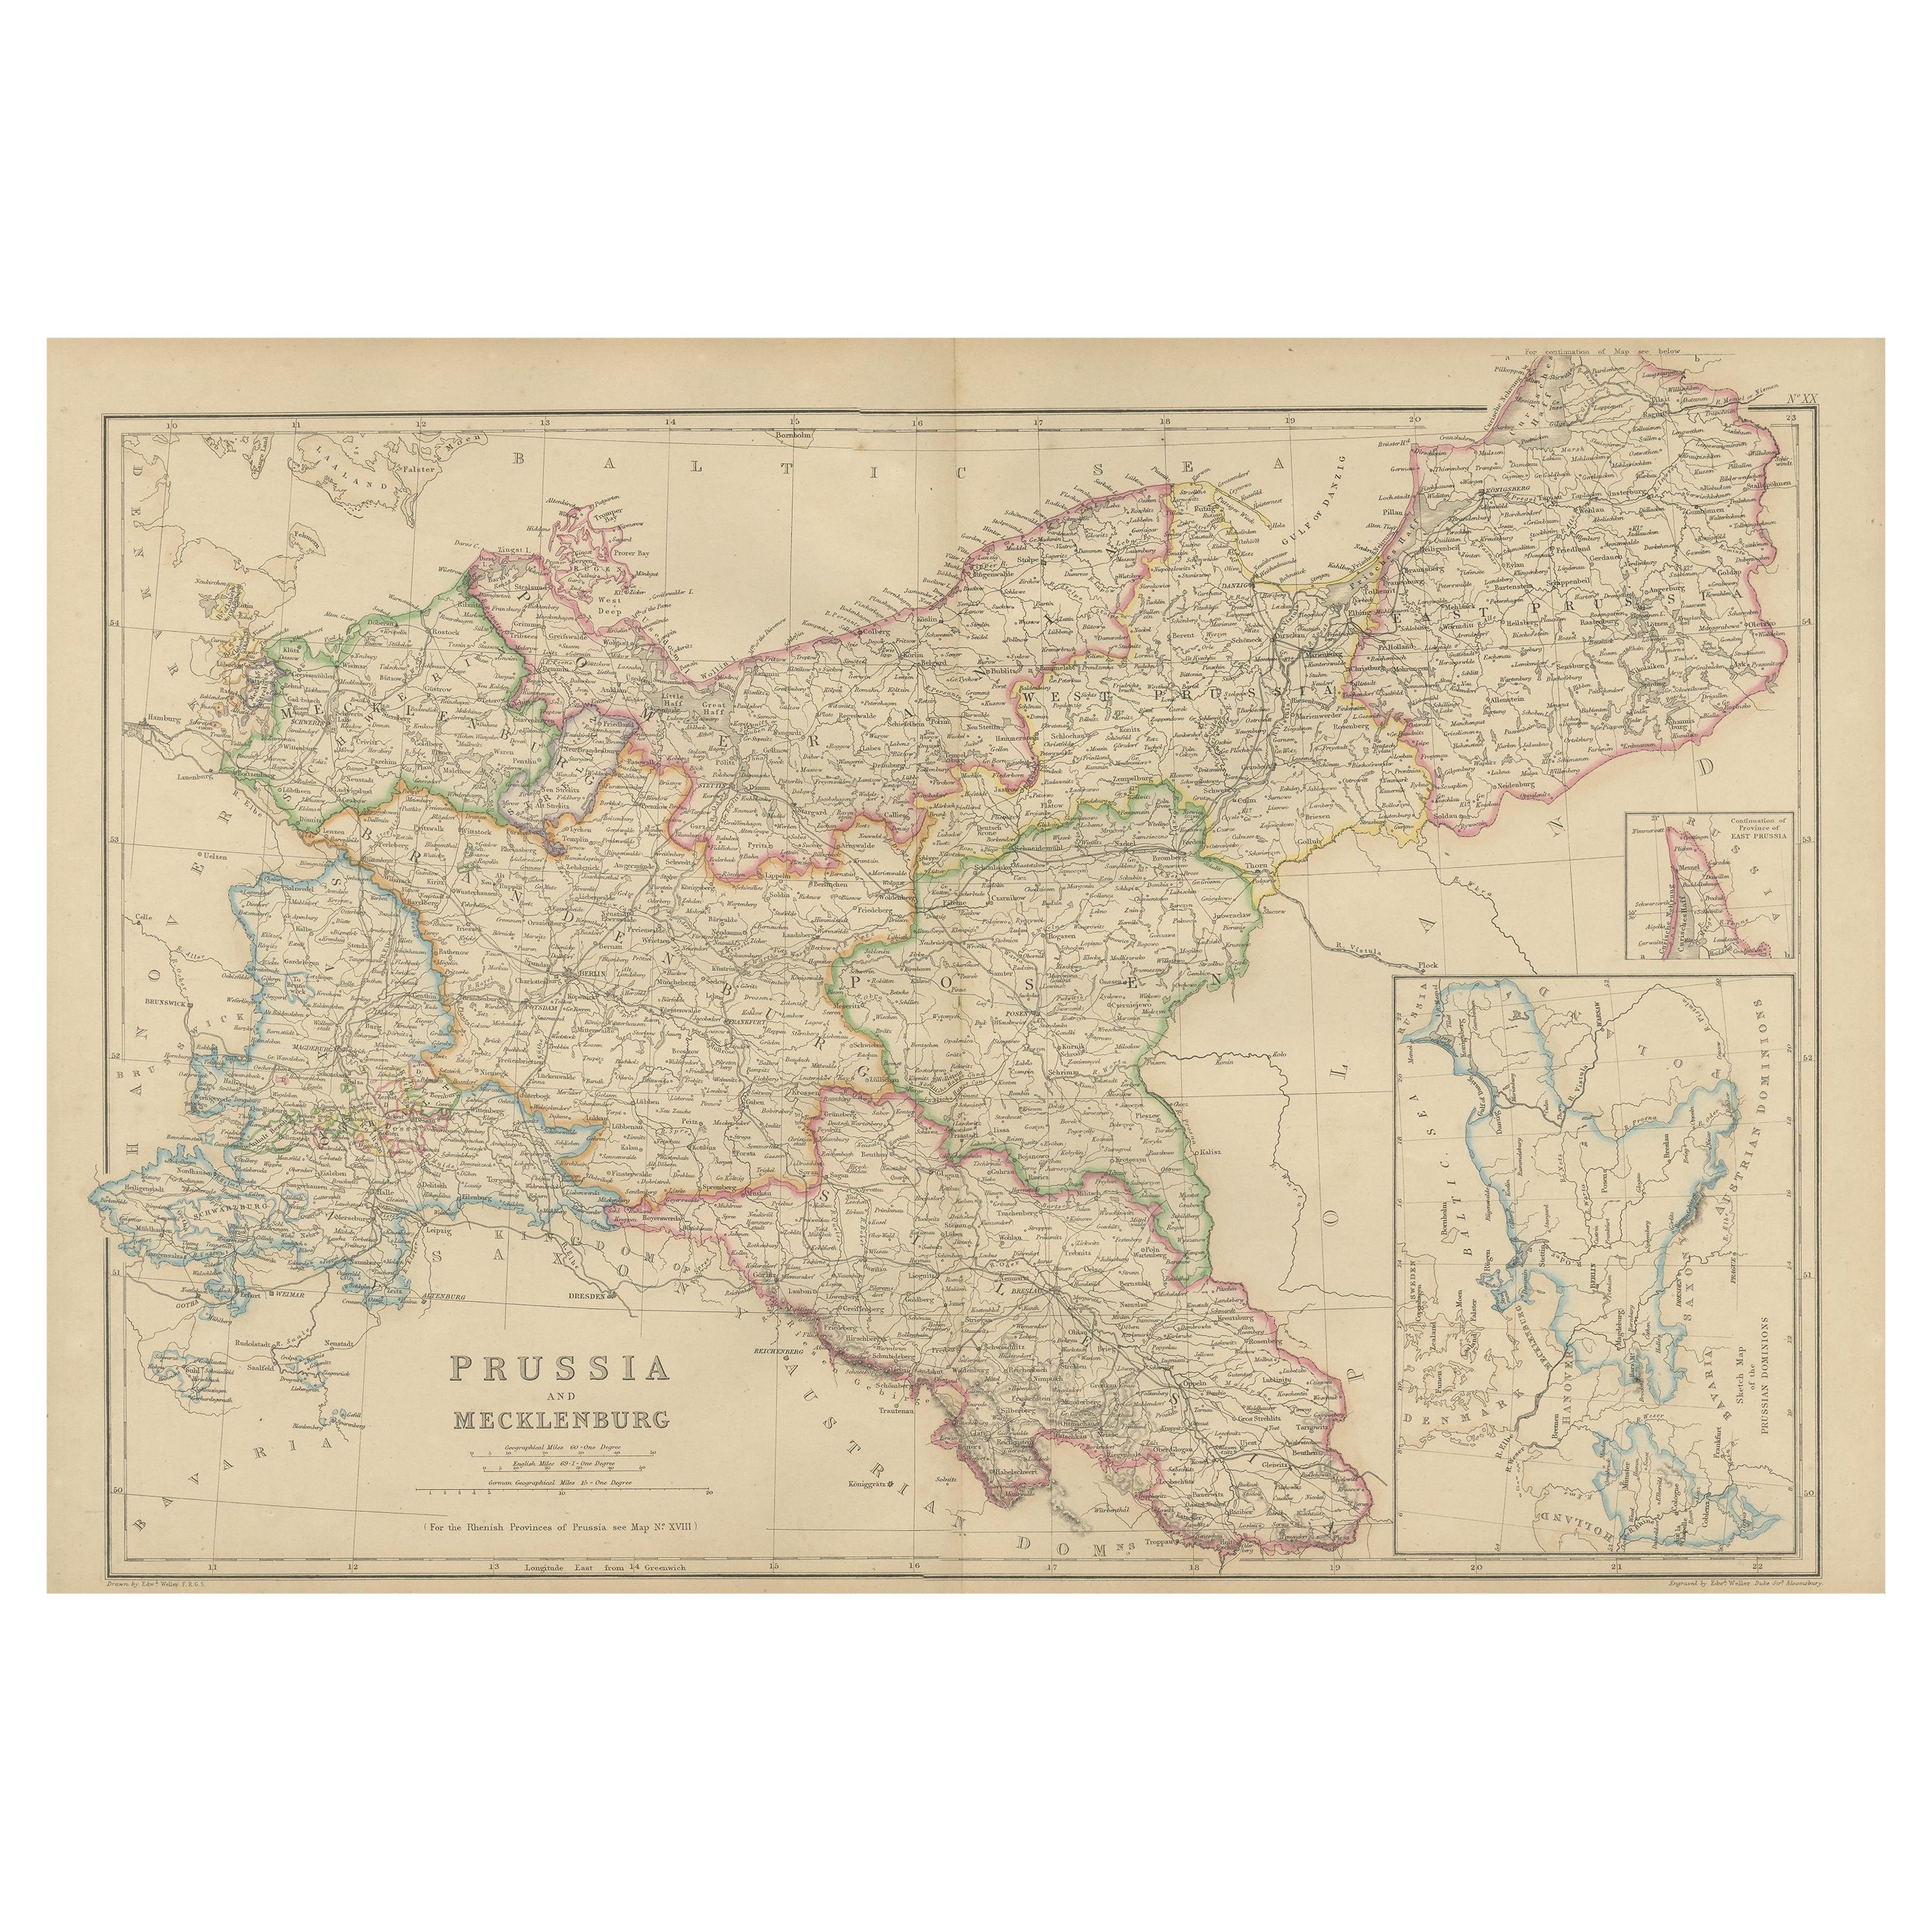 Antique Map of Prussia and Mecklenburg by W. G. Blackie, 1859